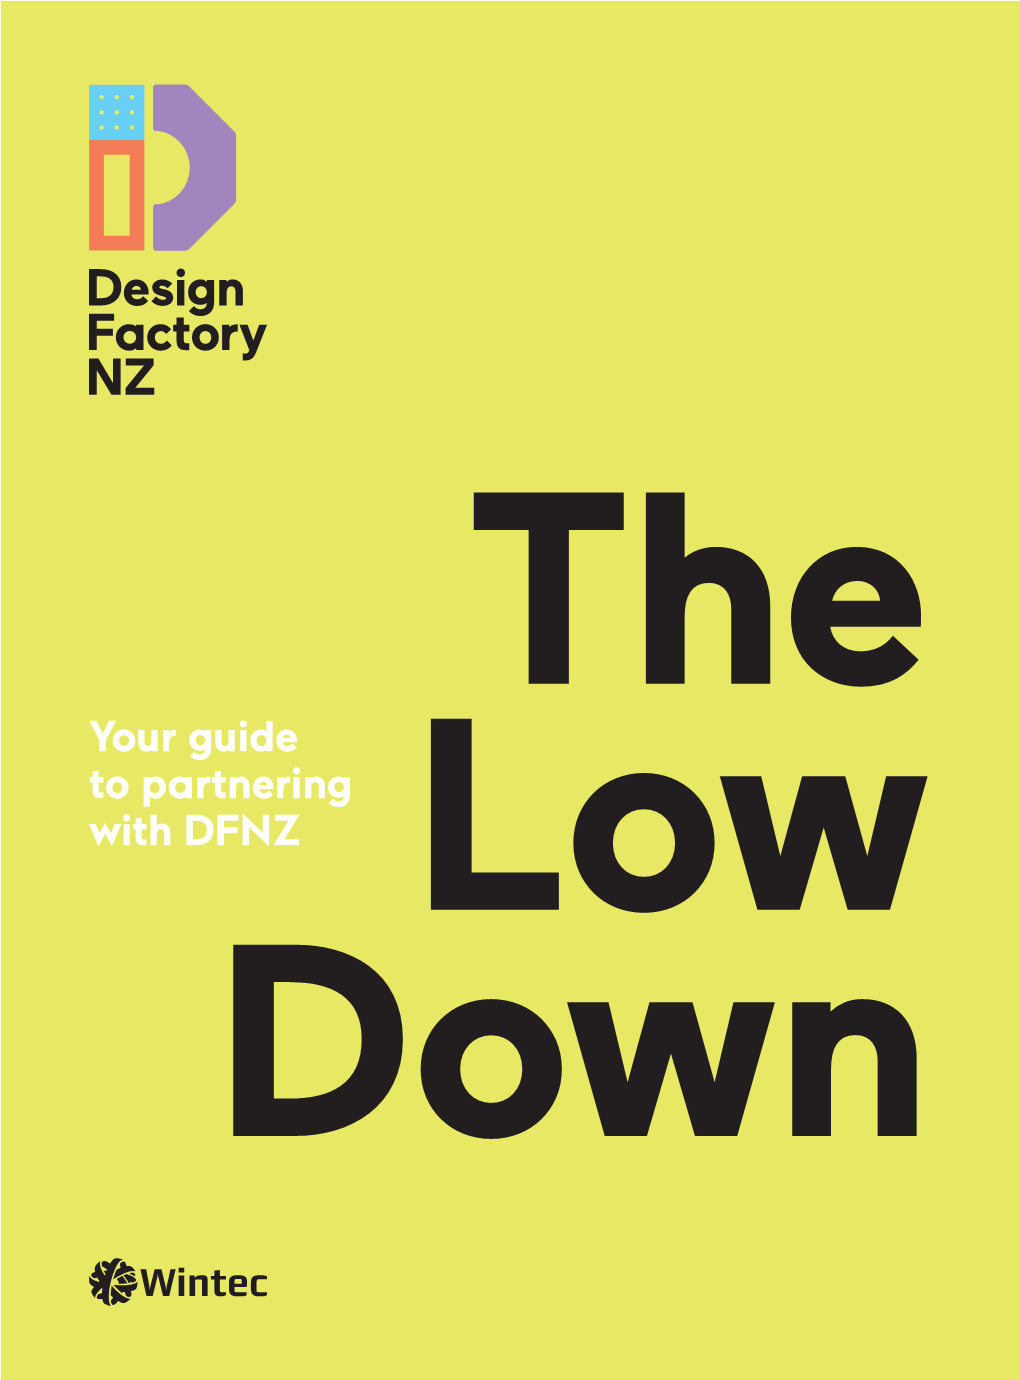 Your Guide to Partnering with DFNZ